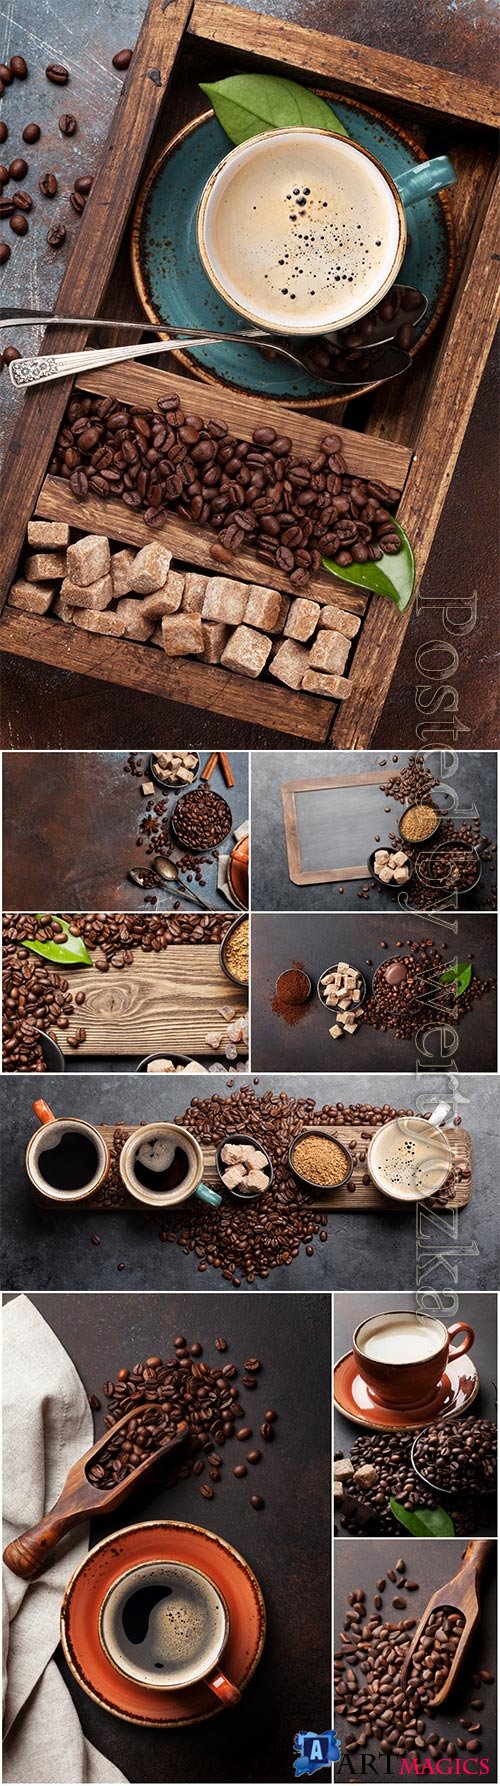 Coffee cup beans and sugar beautiful stock photo